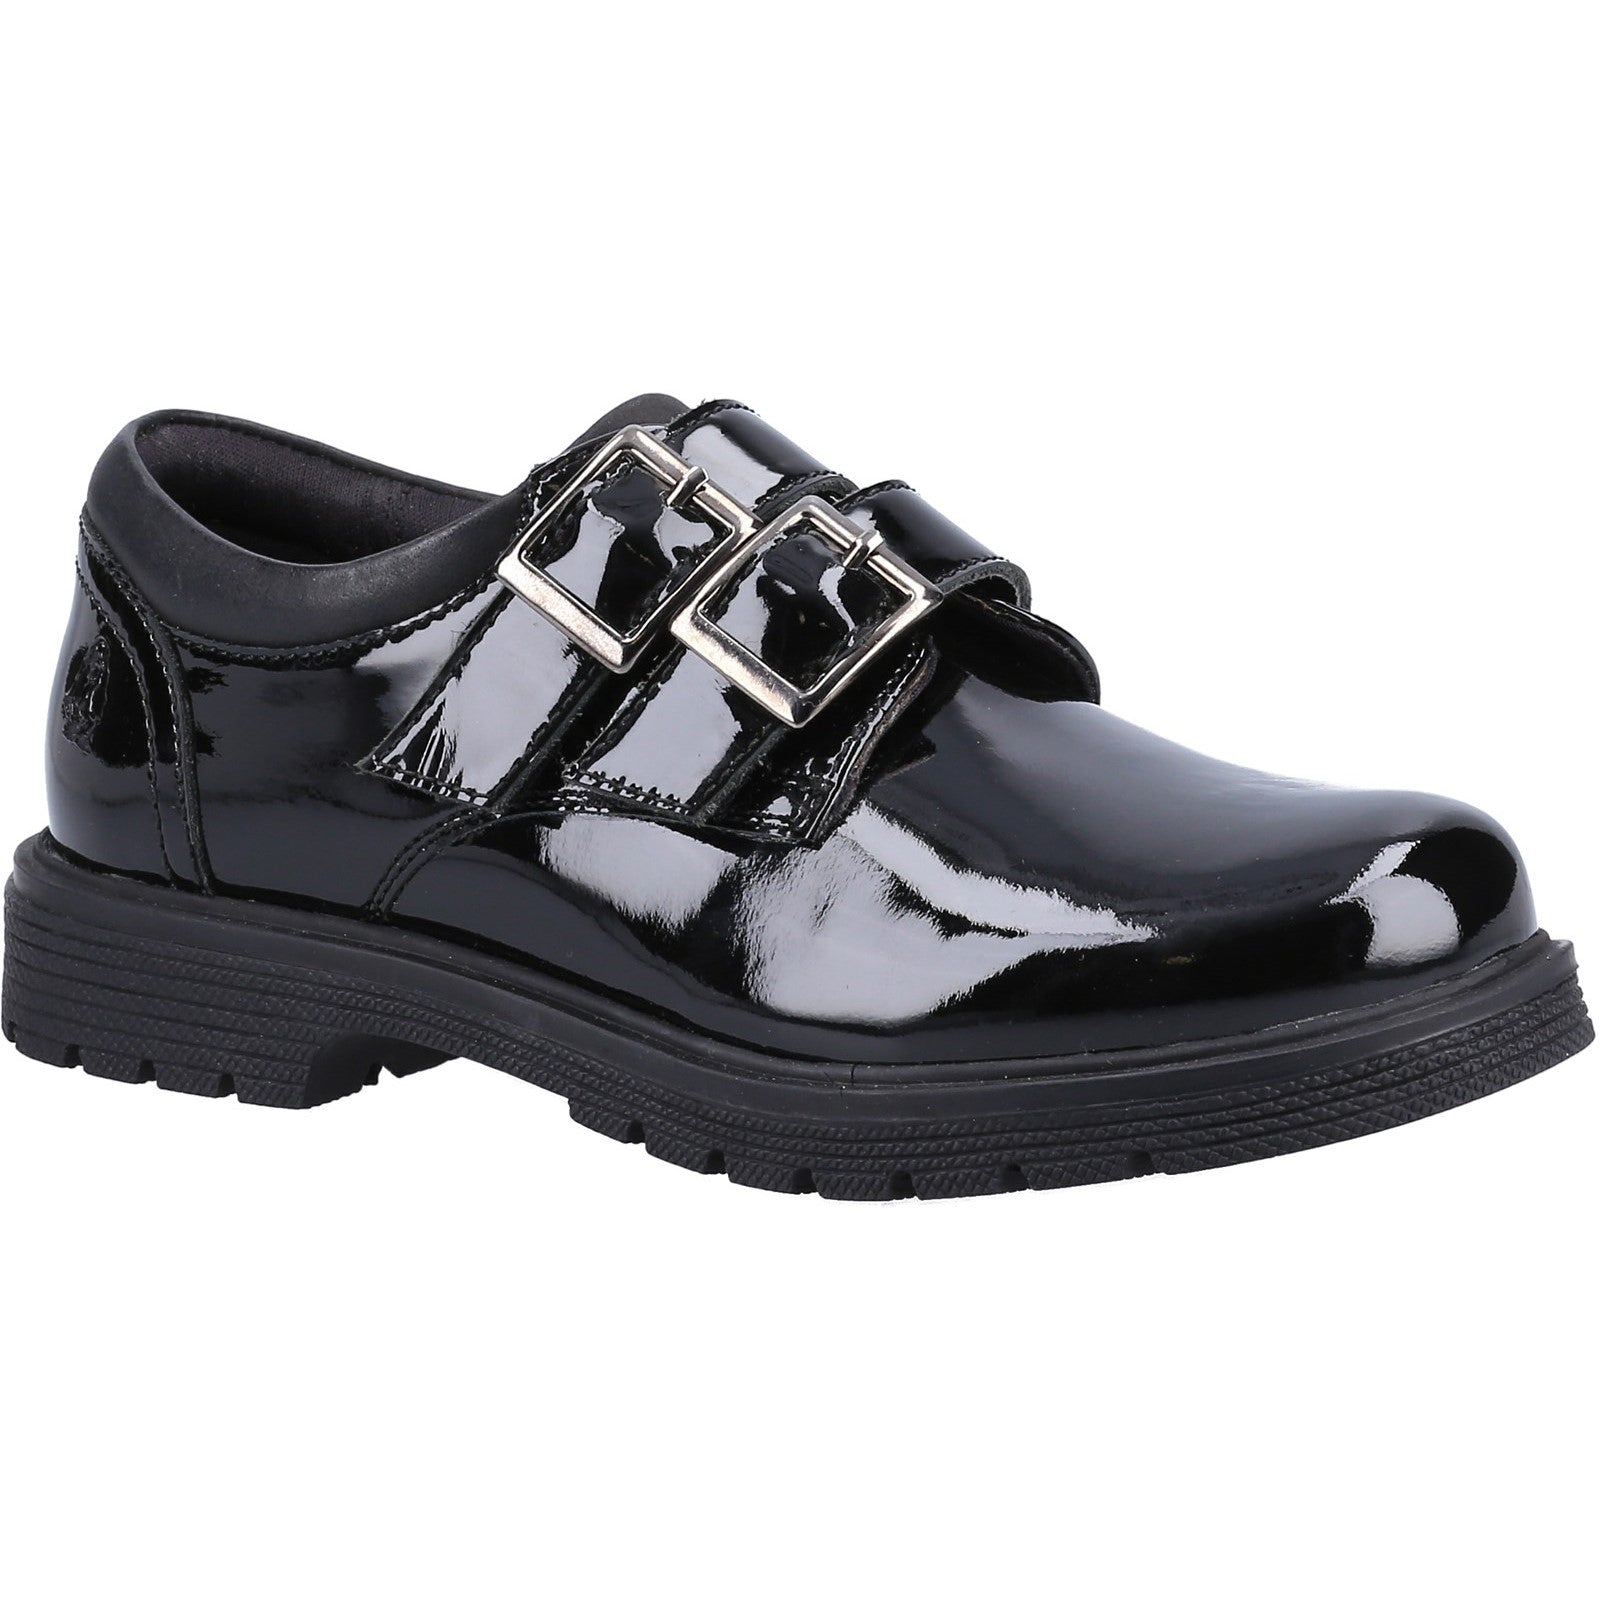 Hush Puppies Girls Sunny Patent Leather School Shoes - Black